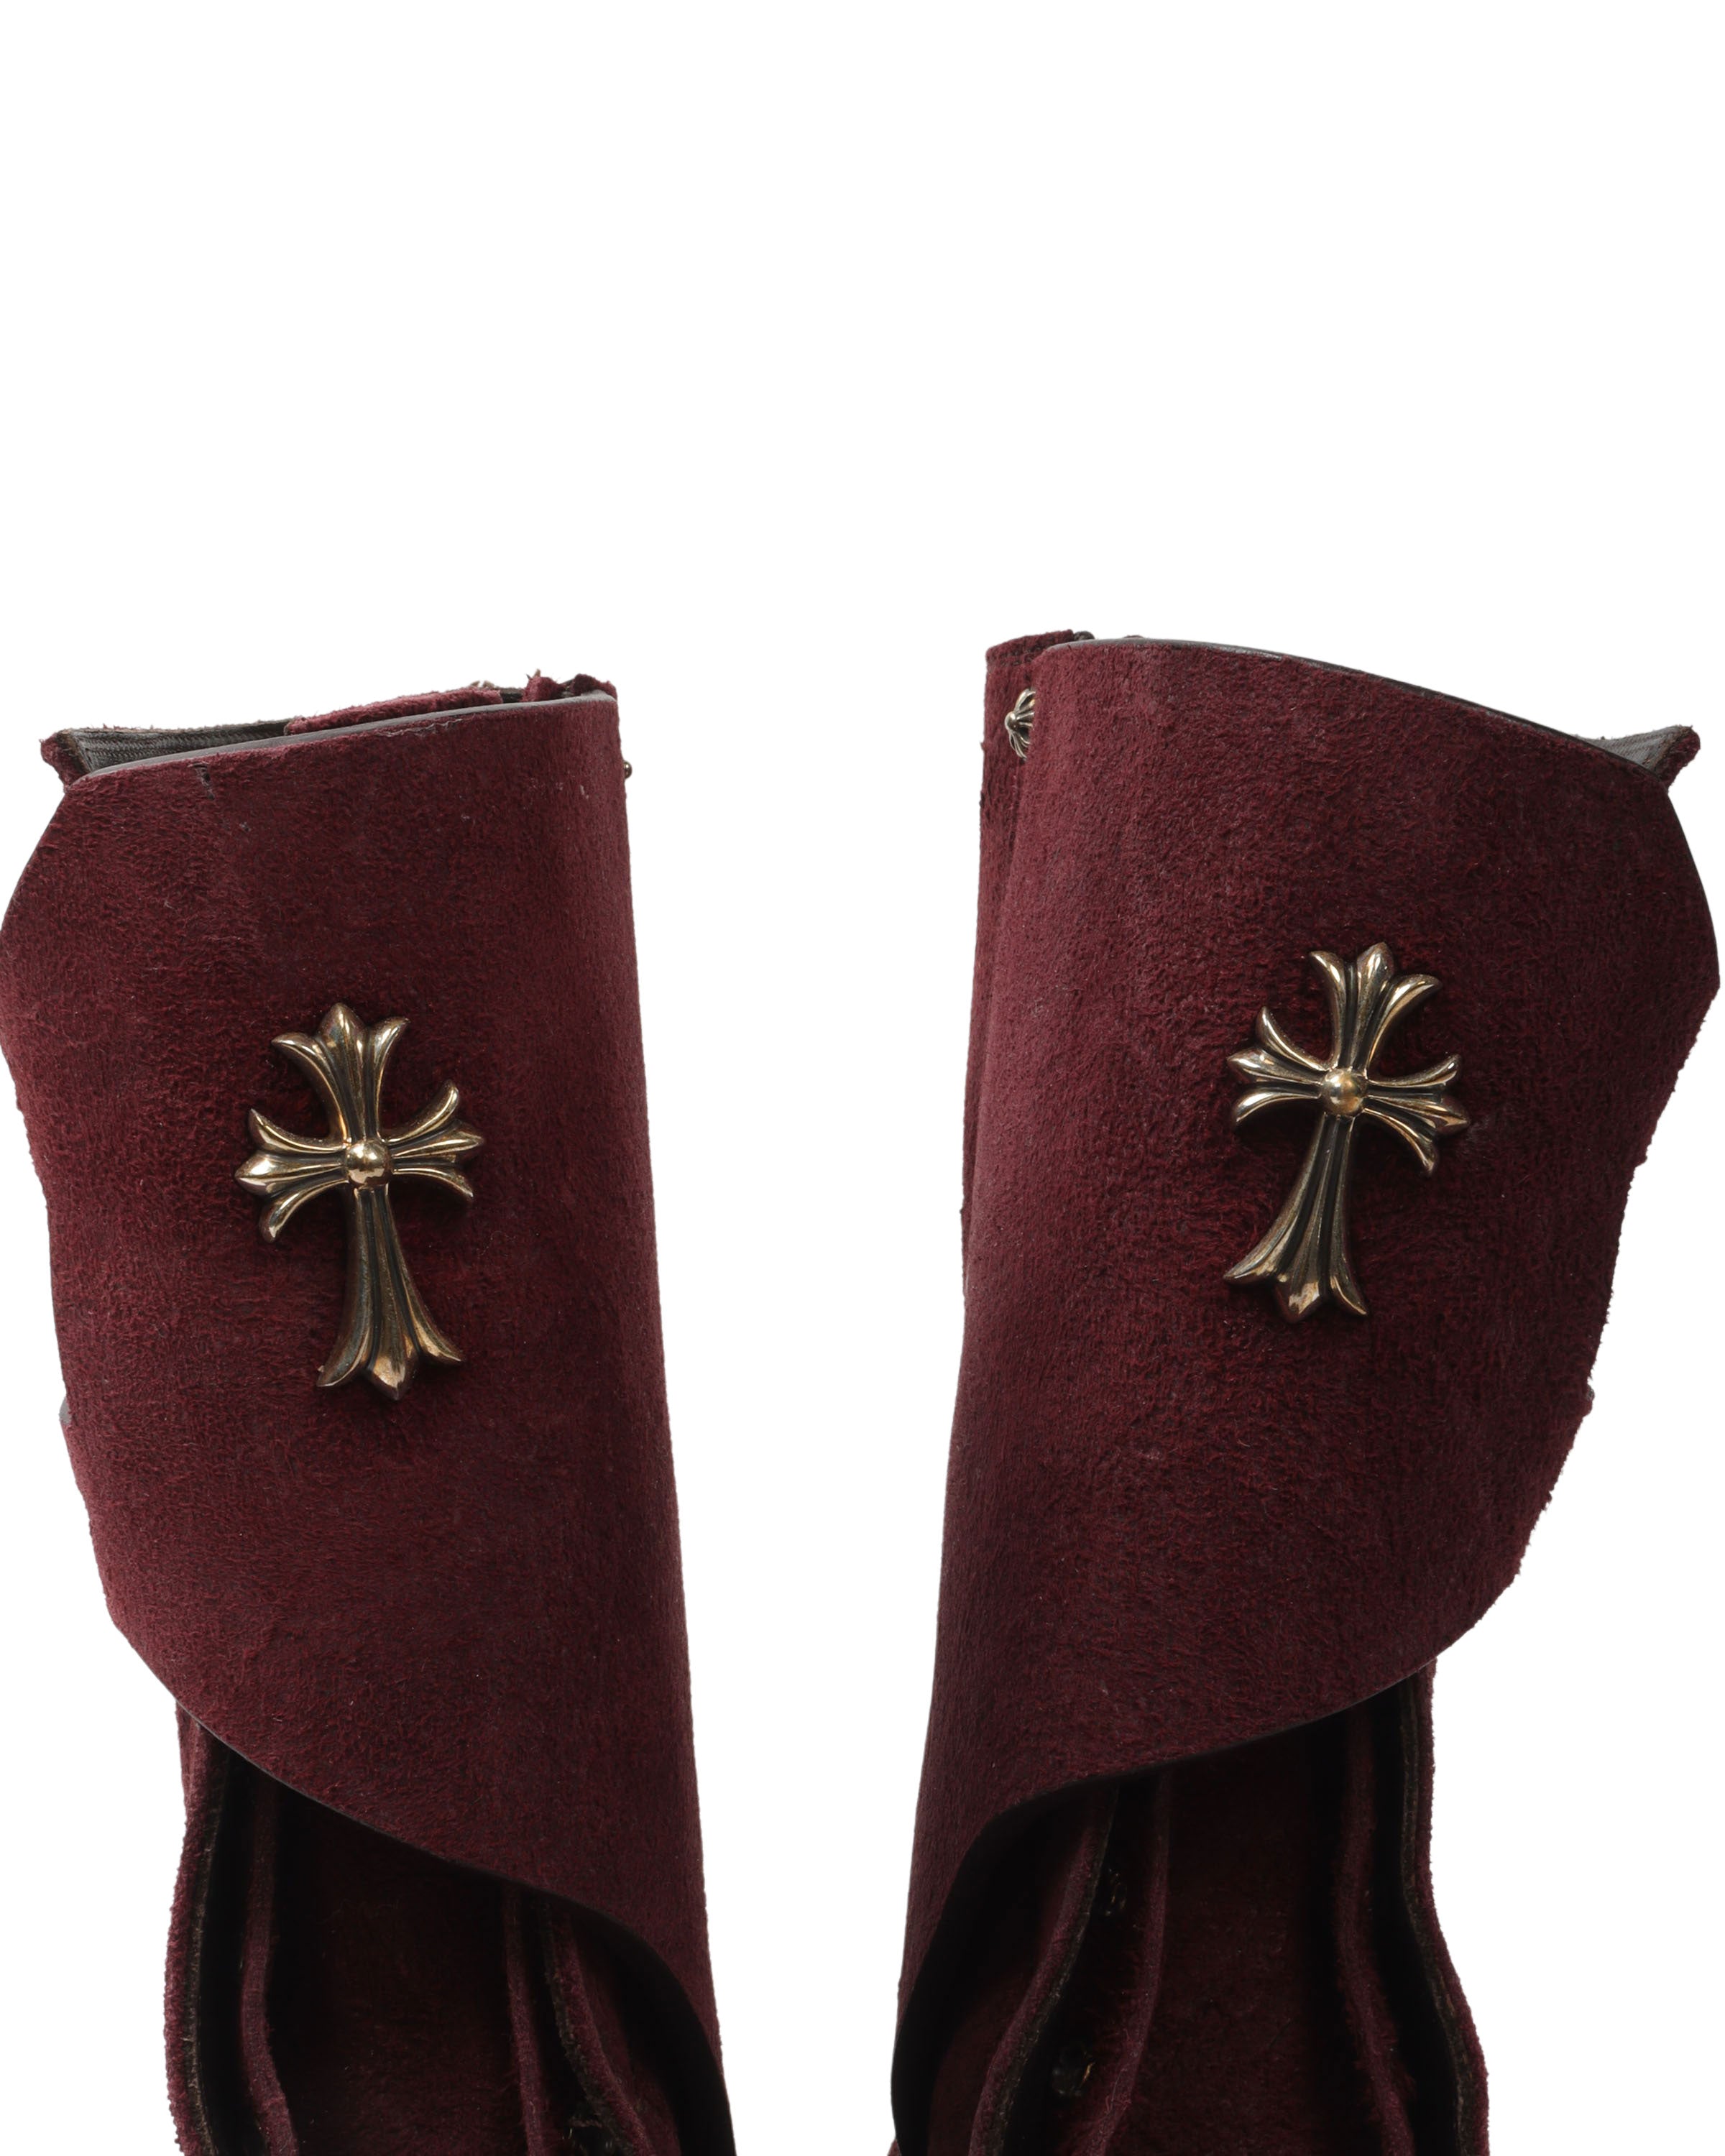 Rick Owens Suede Mohawk Boots w/ CH Embellishments